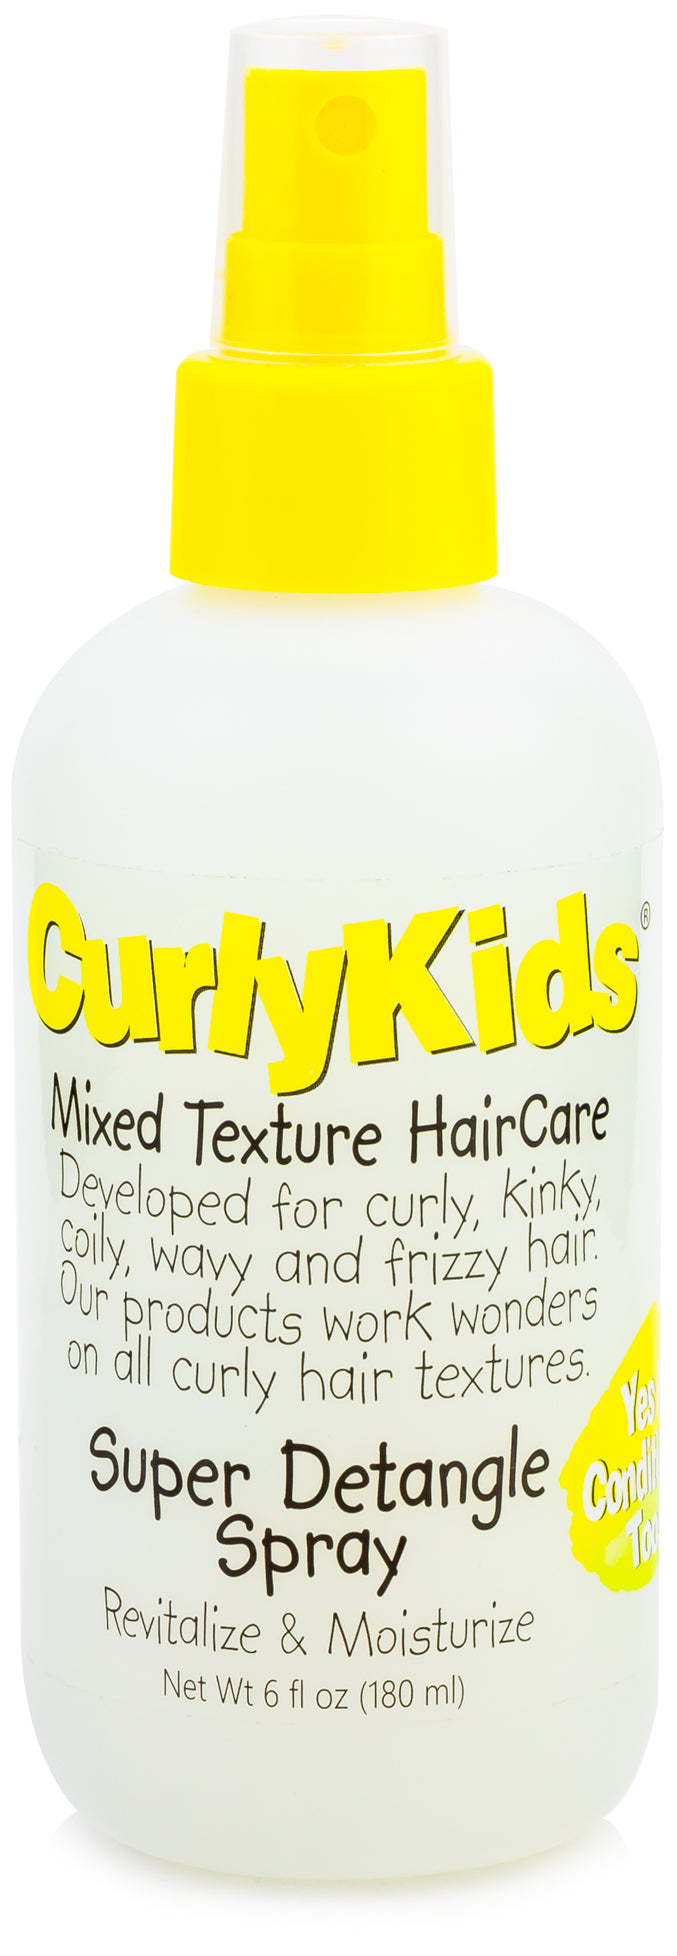 Curly Kids Mixed Texture HairCare Super Detangle Spray